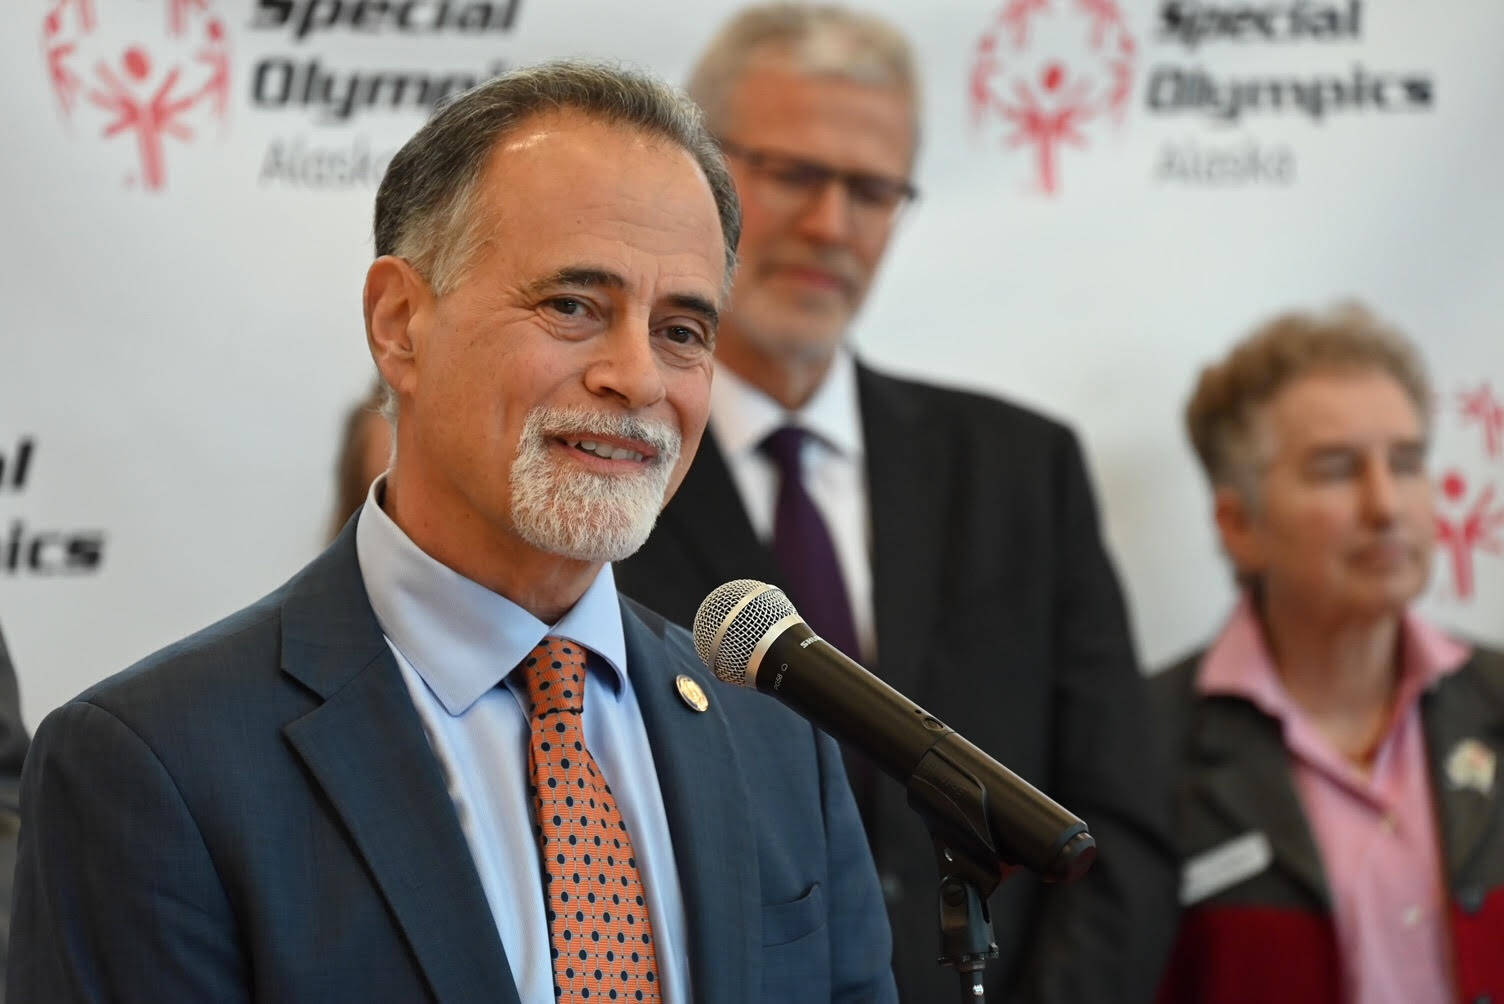 Peter Micciche speaks at the ceremony for the signing of Senate Bill 185 into law at Special Olympics Alaska in Anchorage, Alaska, on Tuesday, Sept. 13, 2022. (Photo courtesy Alaska Office of the Governor)